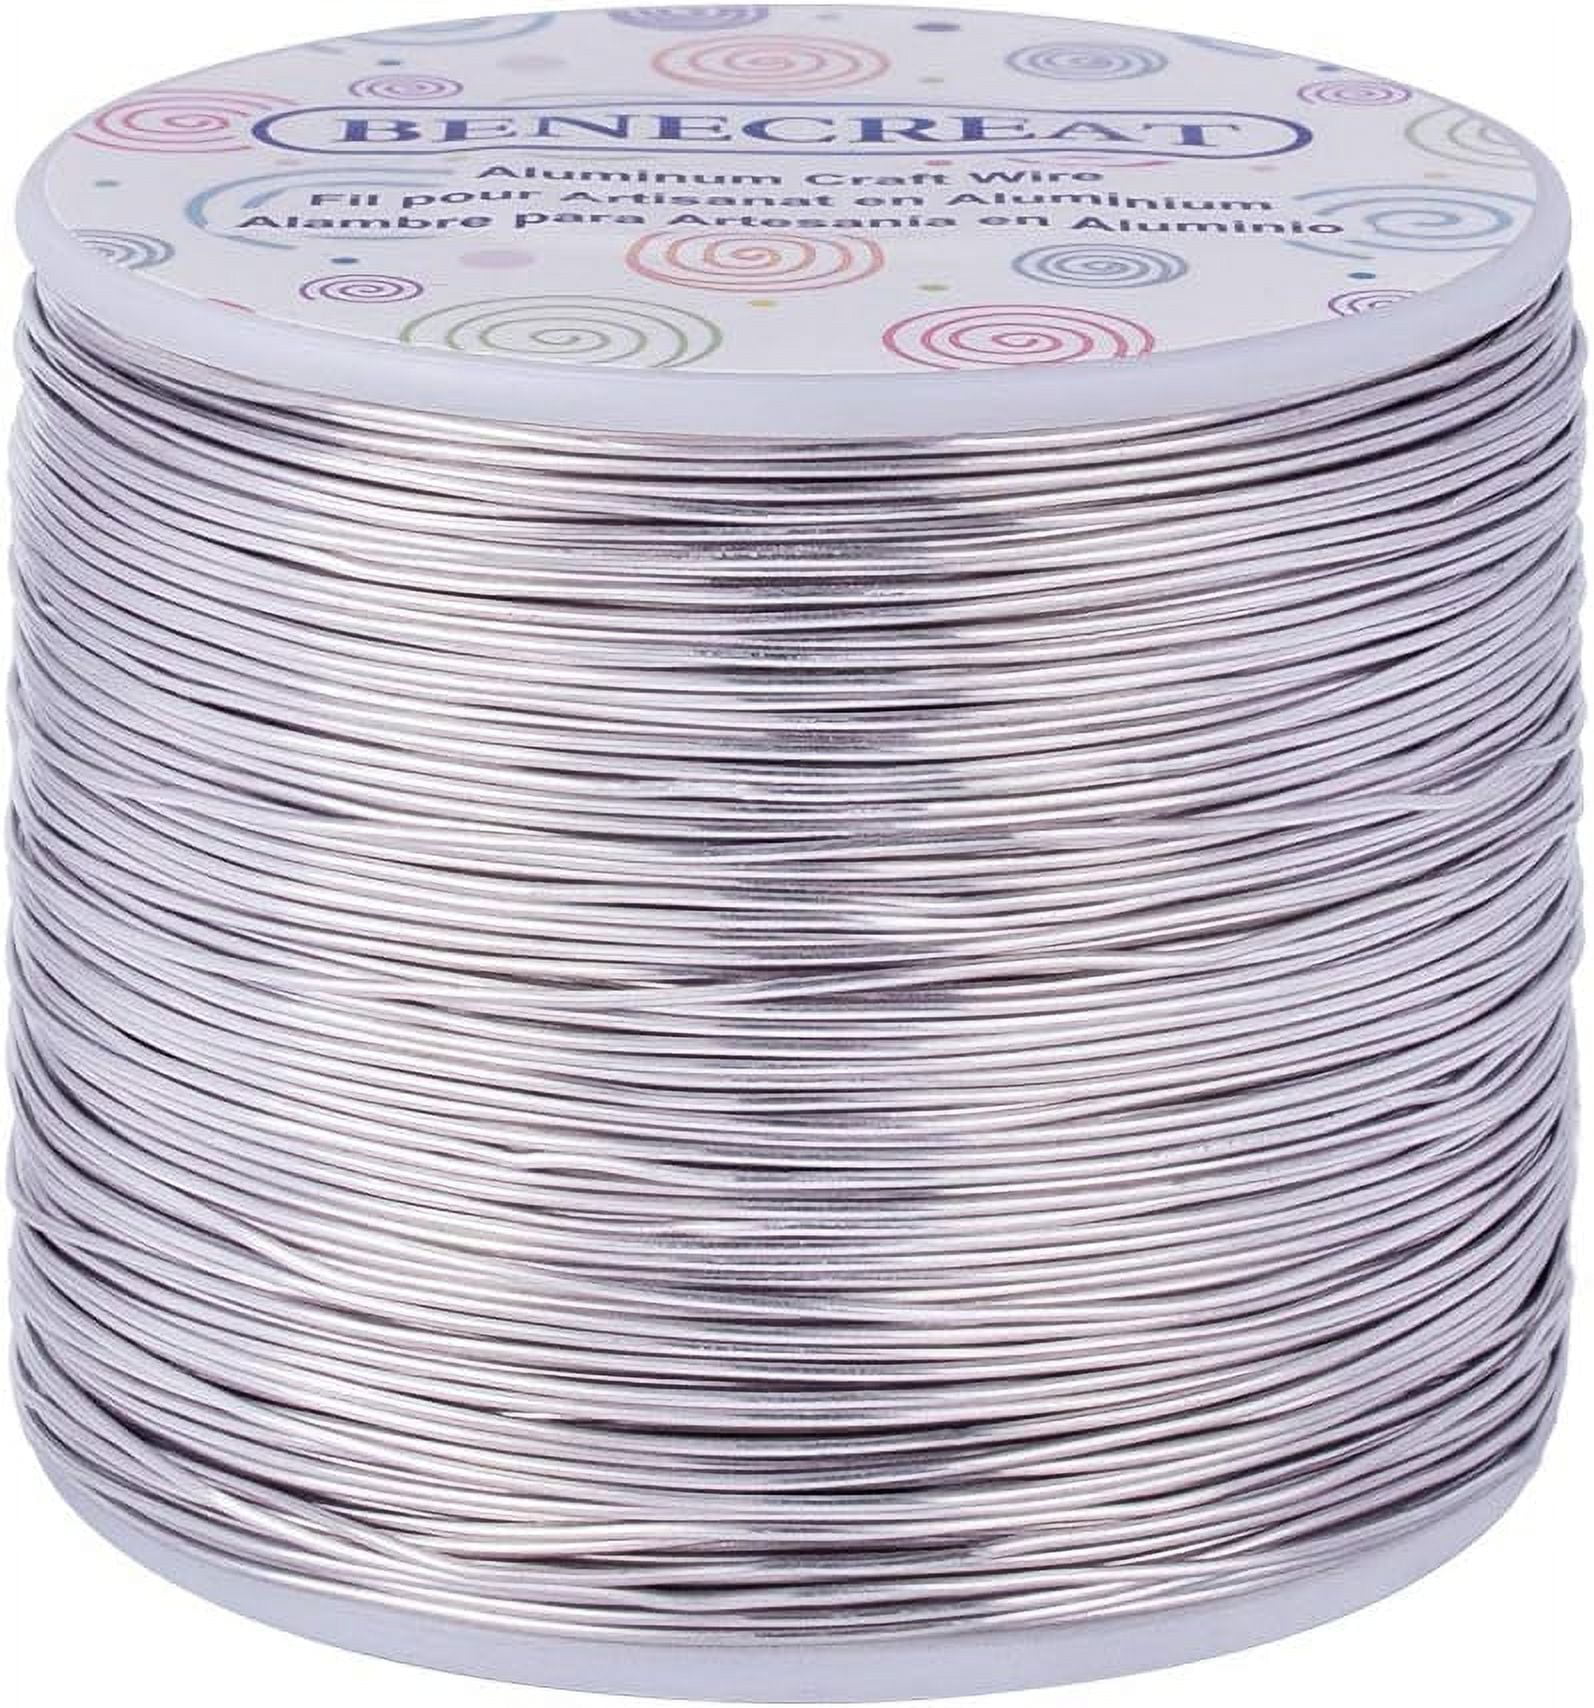 INSPIRELLE 9 Gauge 42 Feet KC Gold Aluminum Craft Wire Bendable Metal Wire  for Jewelry Craft Making